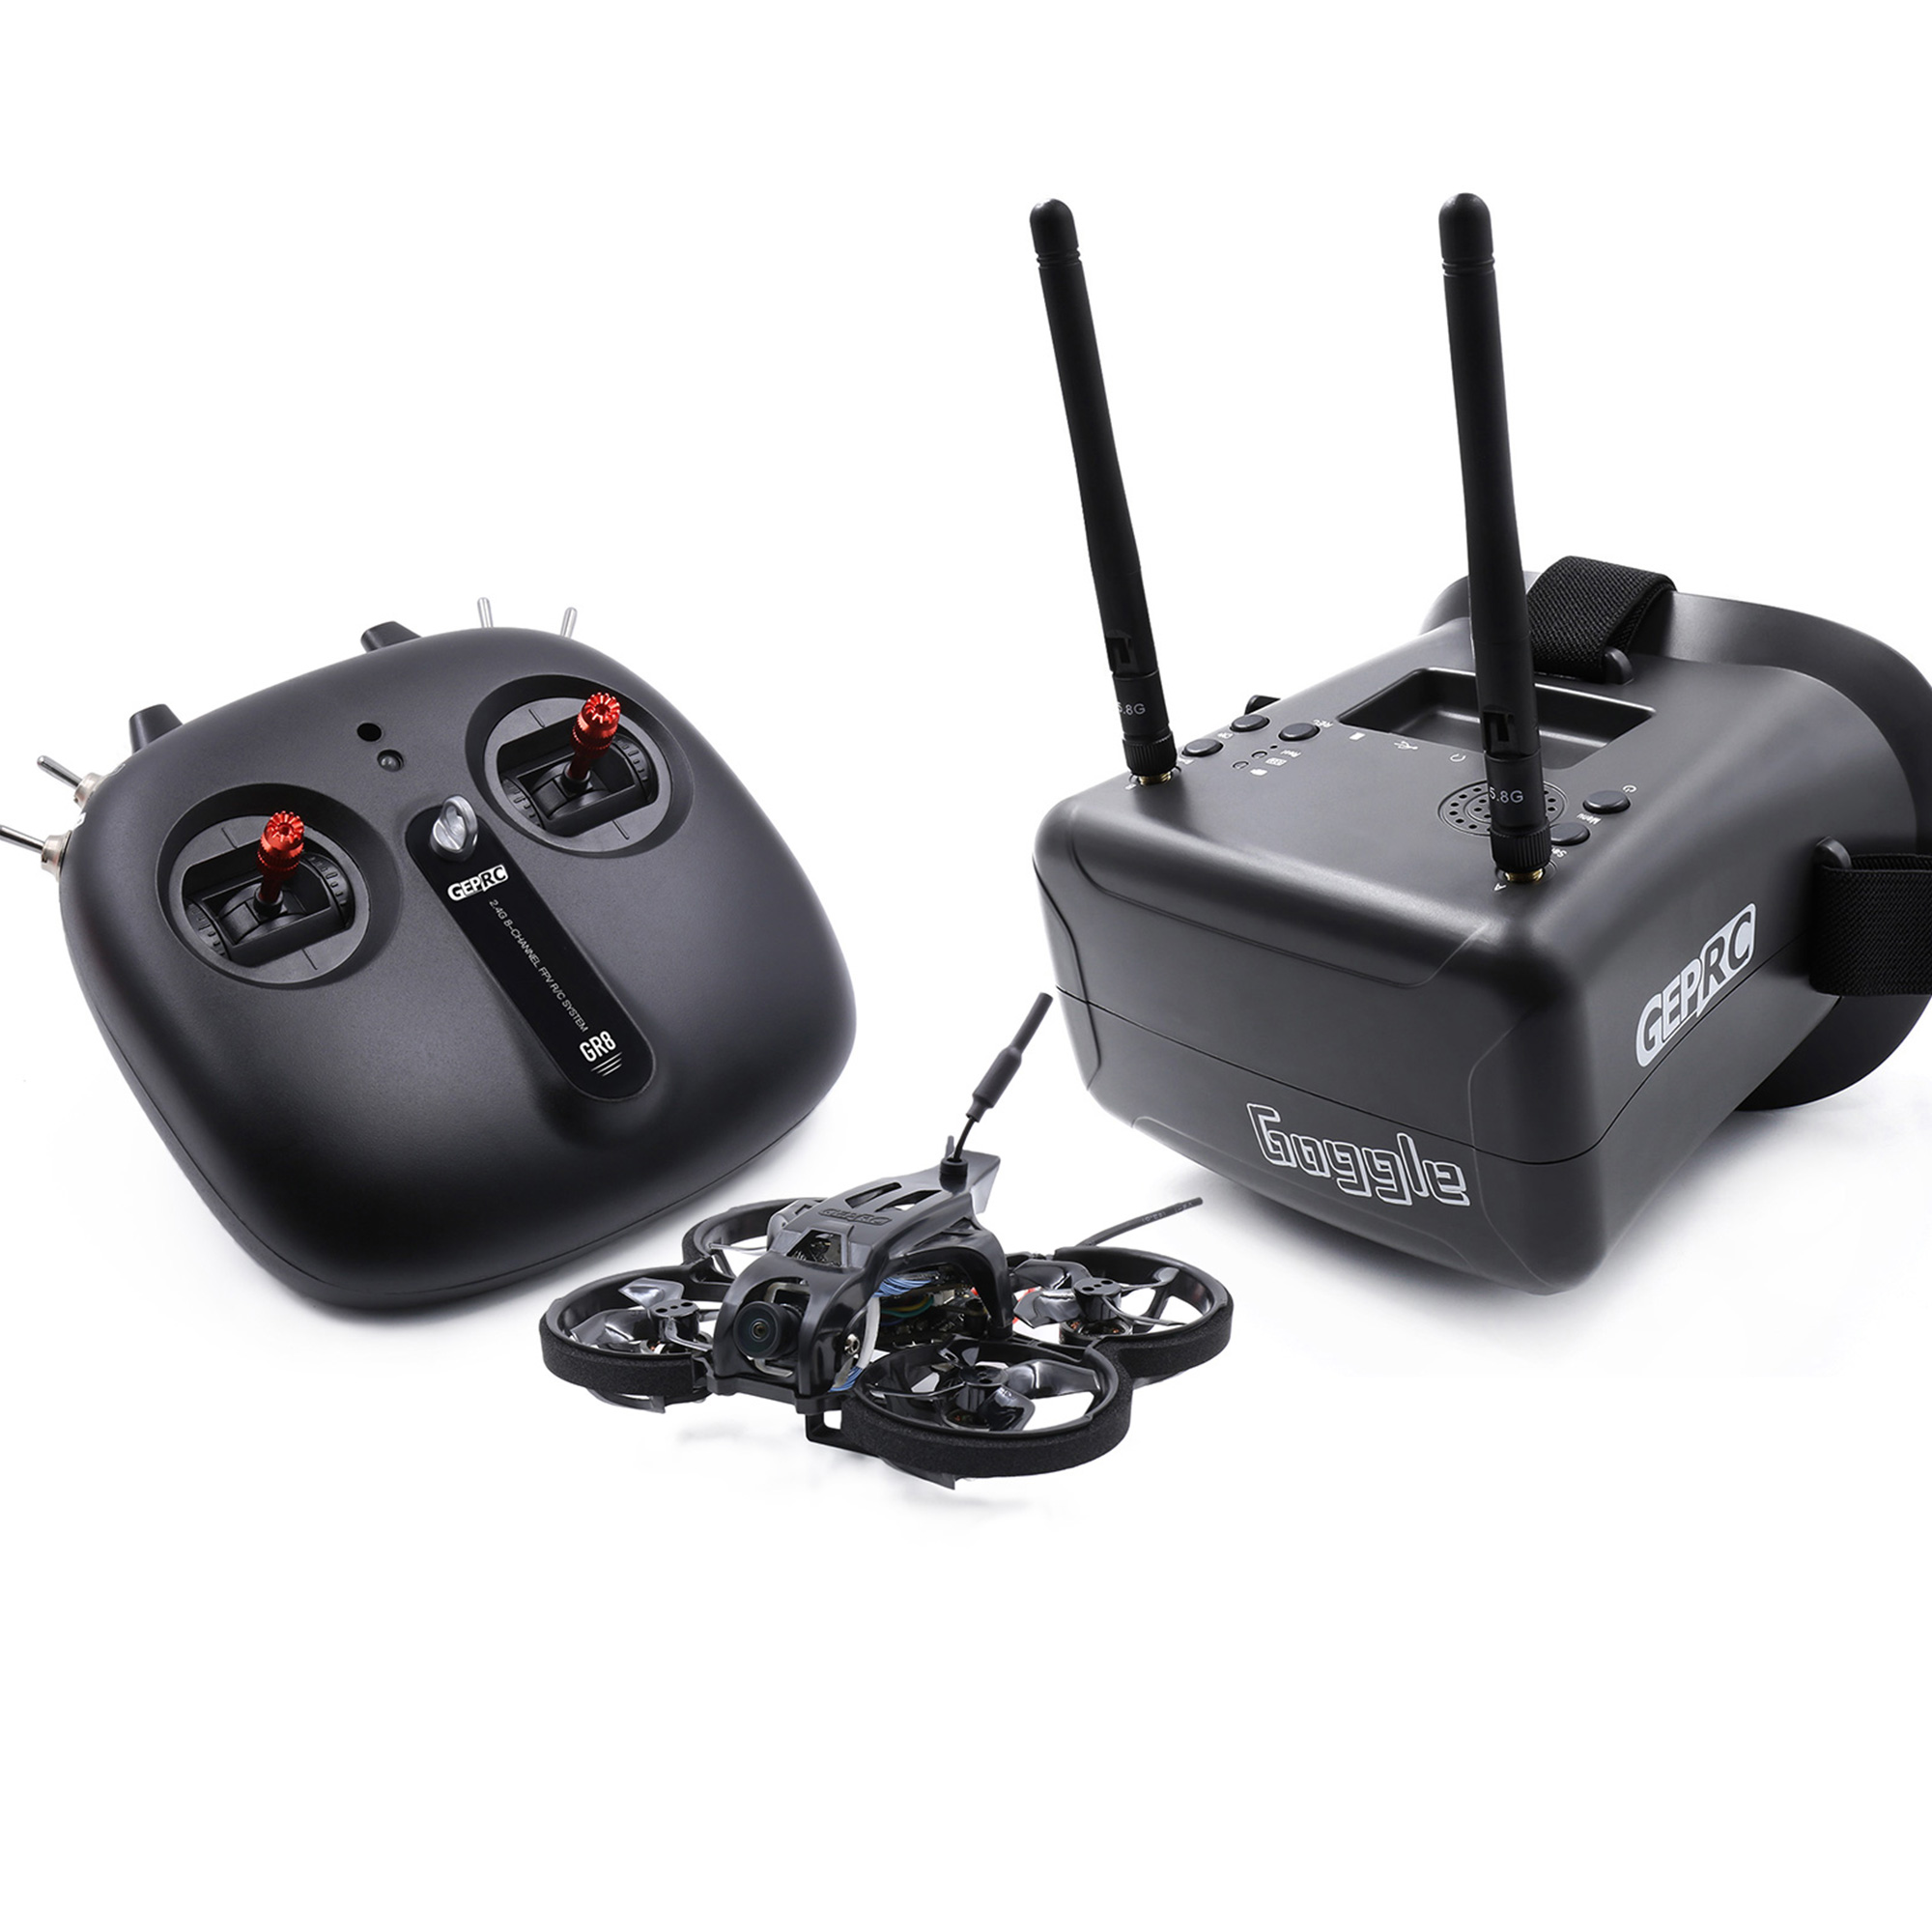 GEPRC TinyGO 1.6inch 2S 4K Caddx Loris FPV Indoor Whoop+GR8 Remote Controller+RG1 Goggles RTF Ready To Fly FPV Racing RC Drone - Photo: 2